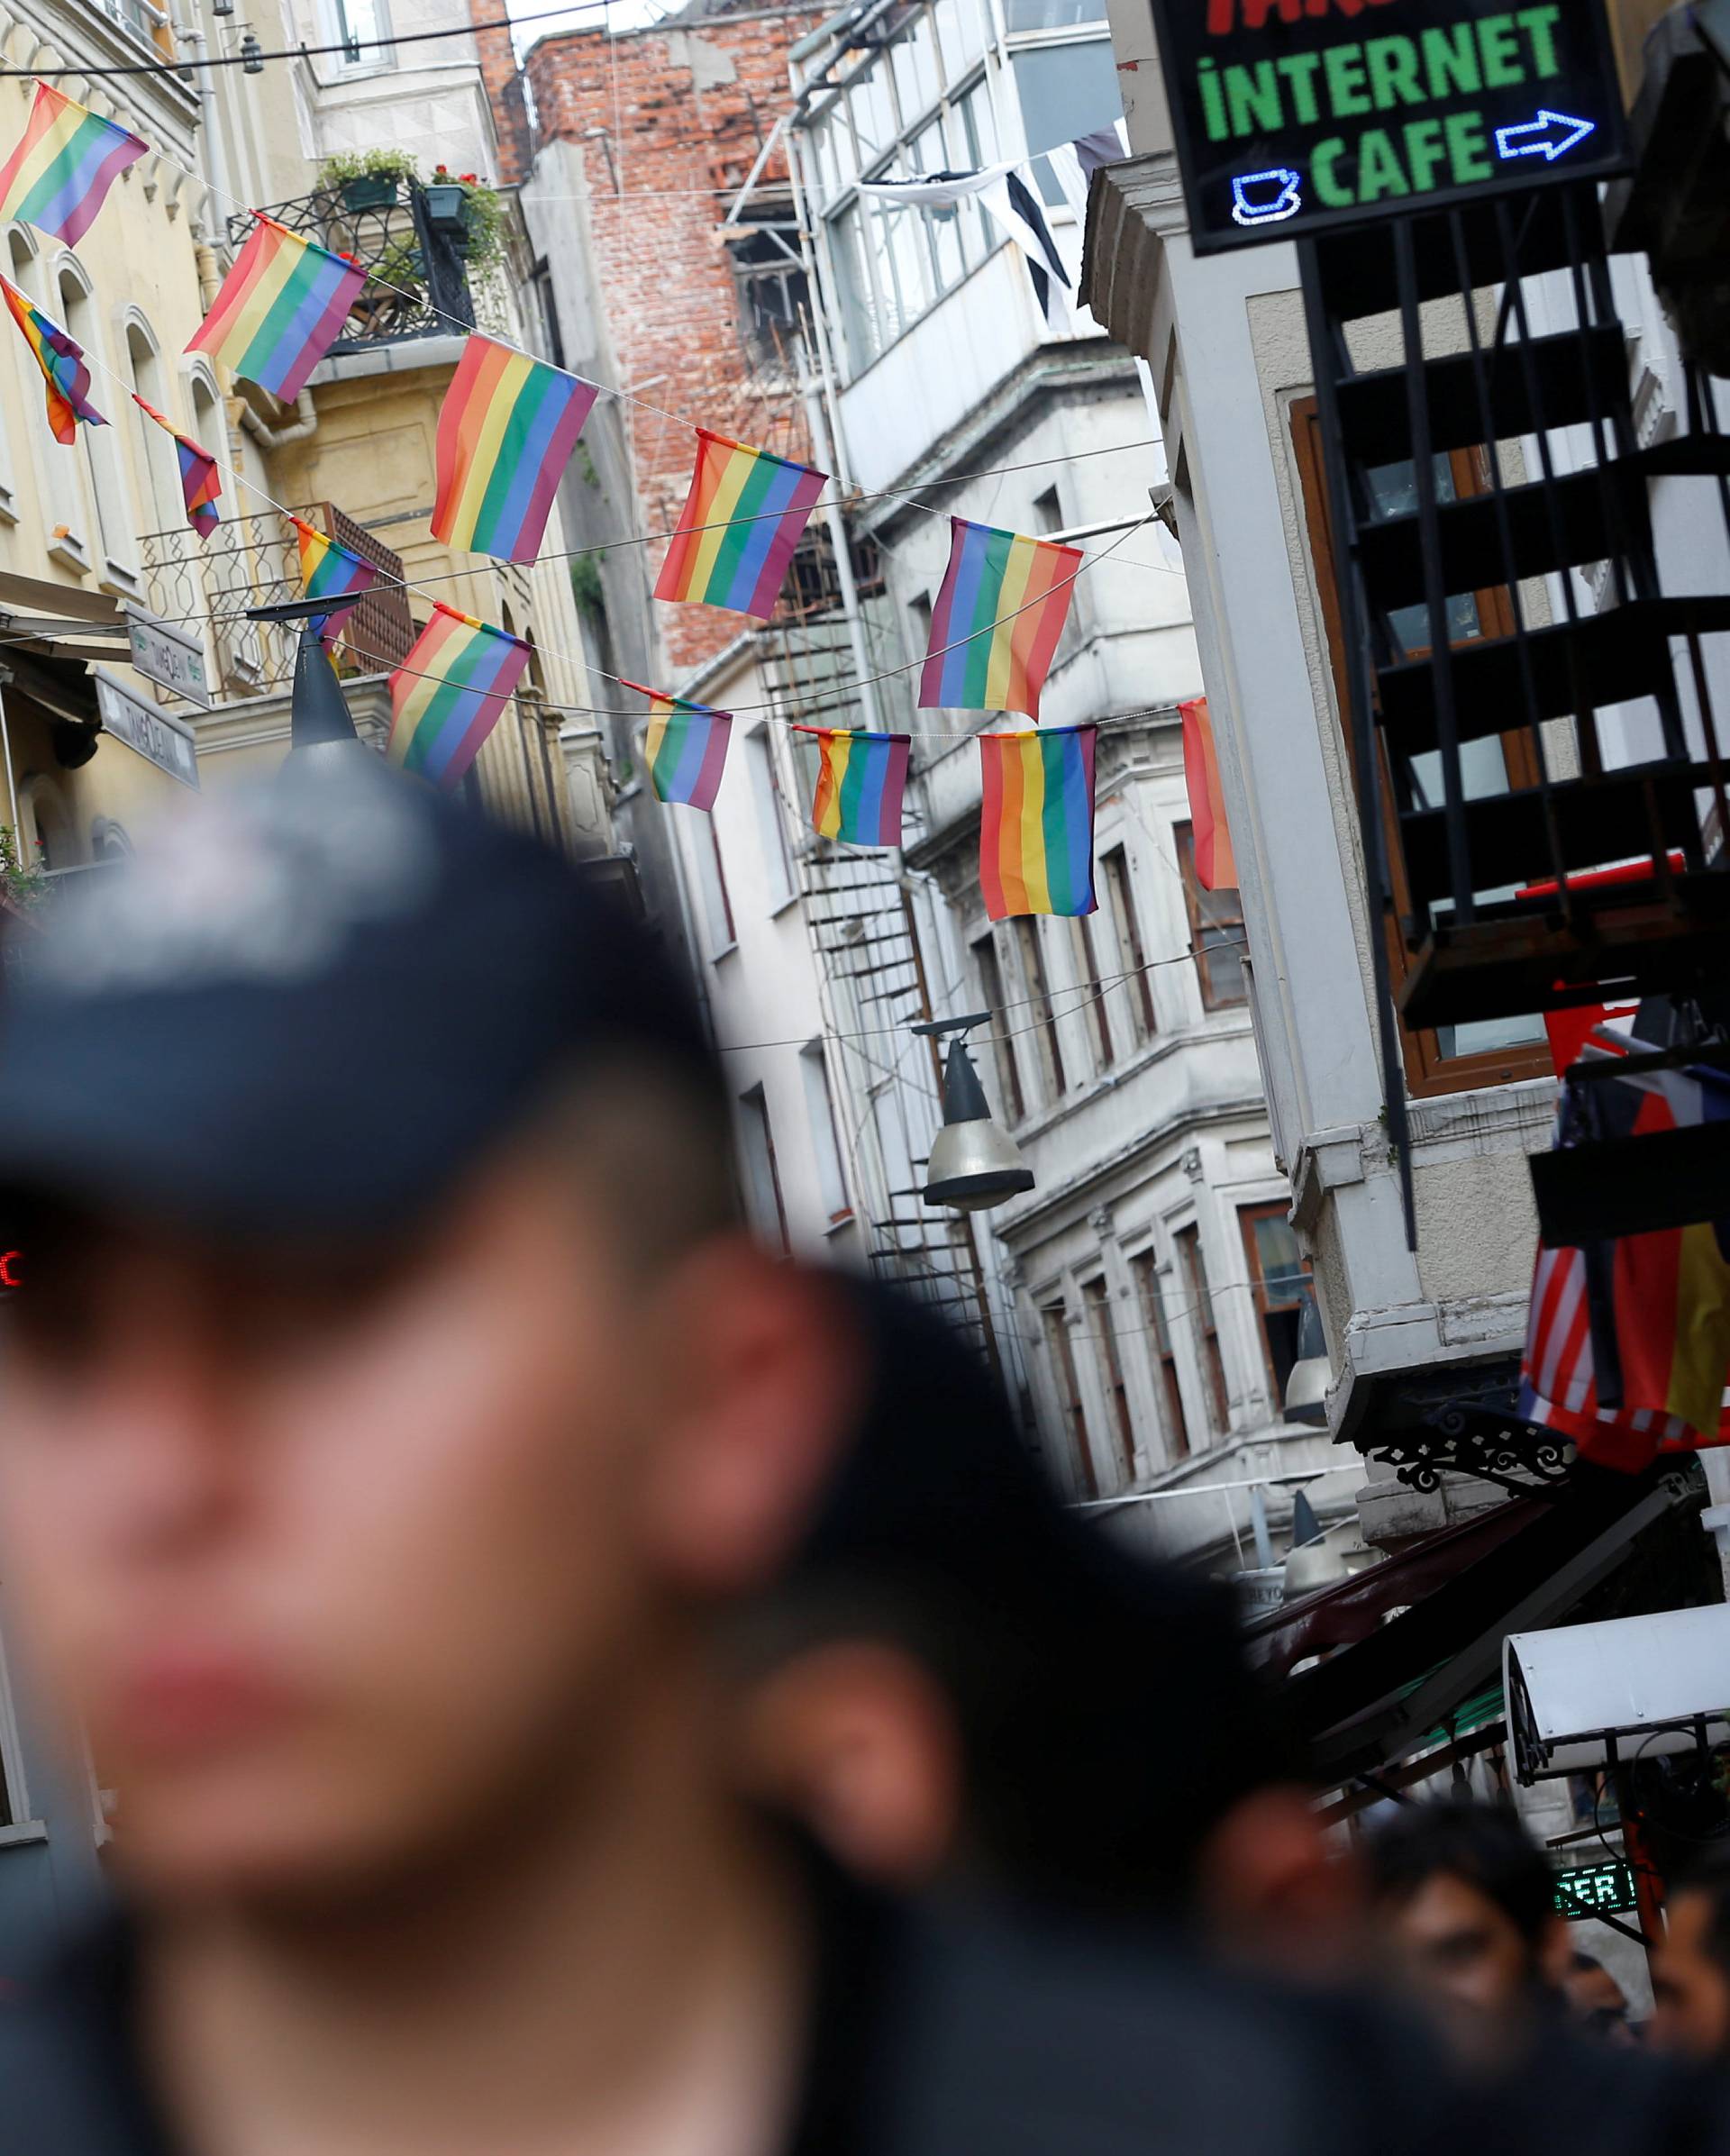 Riot police, with rainbow flags in the background, stands guard at the entrance of a street as LGBT rights activists try to gather for a pride parade, which was banned by the governorship, in Istanbul,